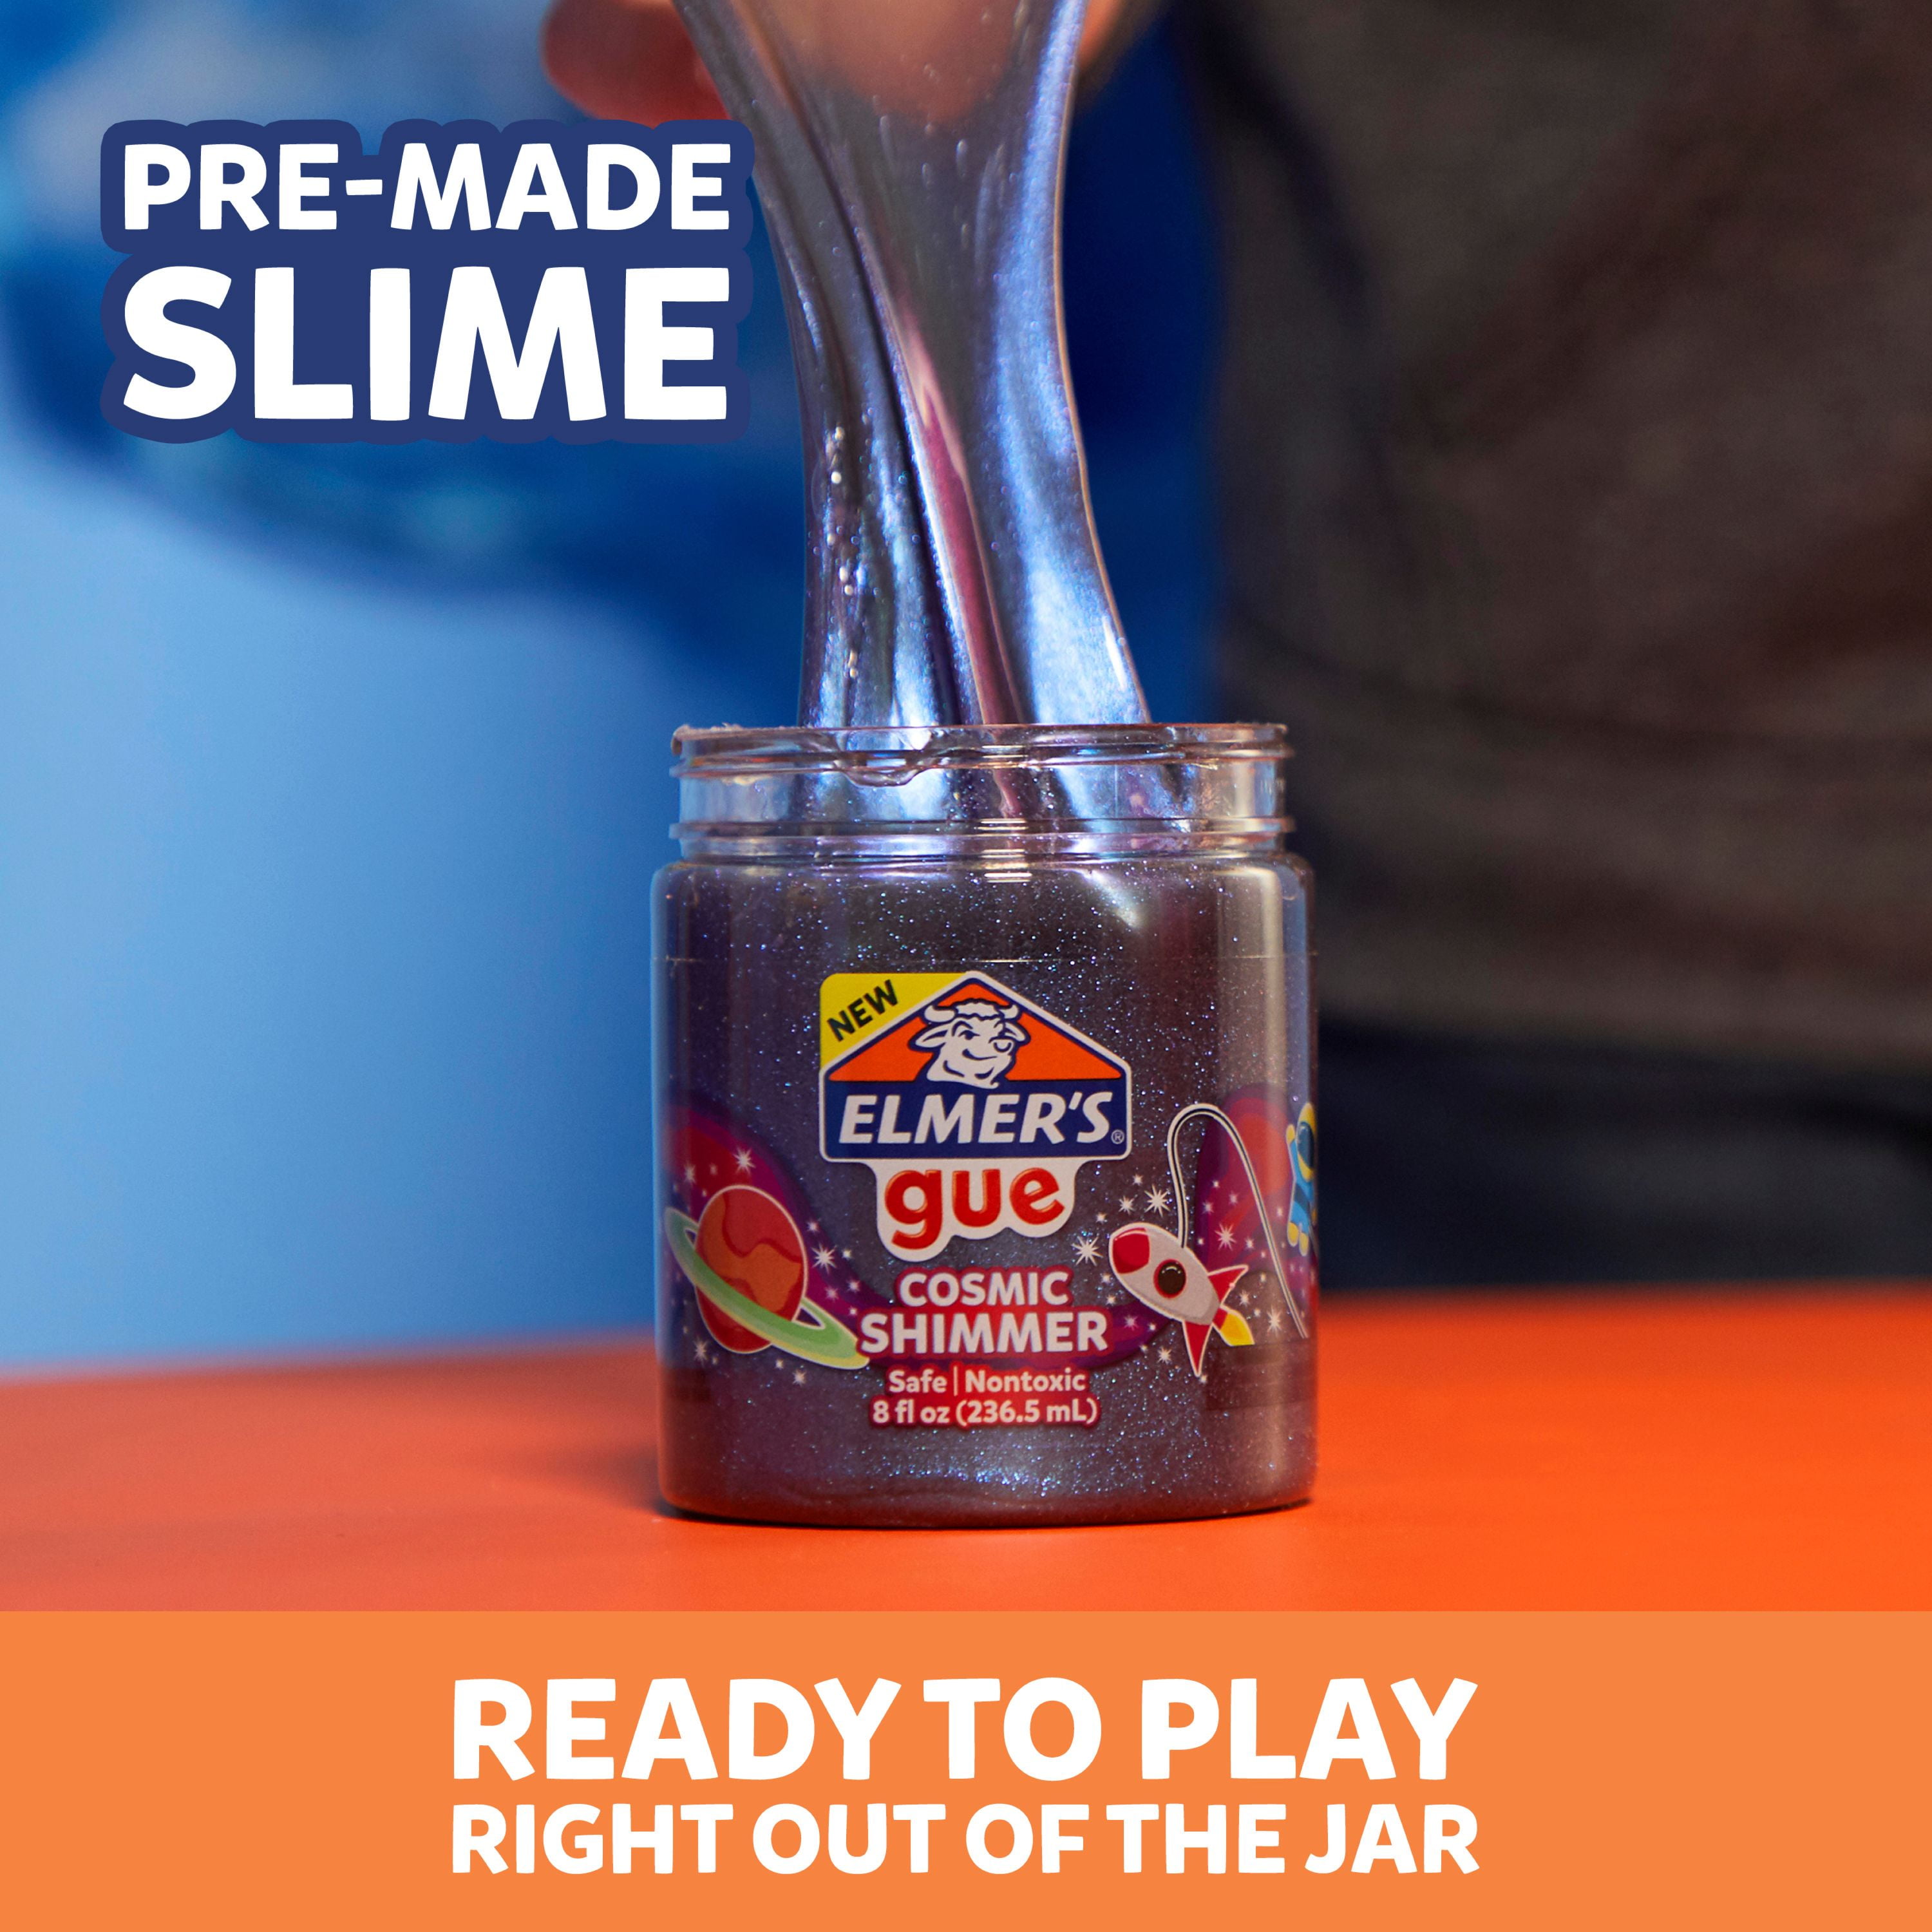 3) ELMER'S GUE 8oz PURPLE COSMIC + PINK SCENTED Premade Slime Non